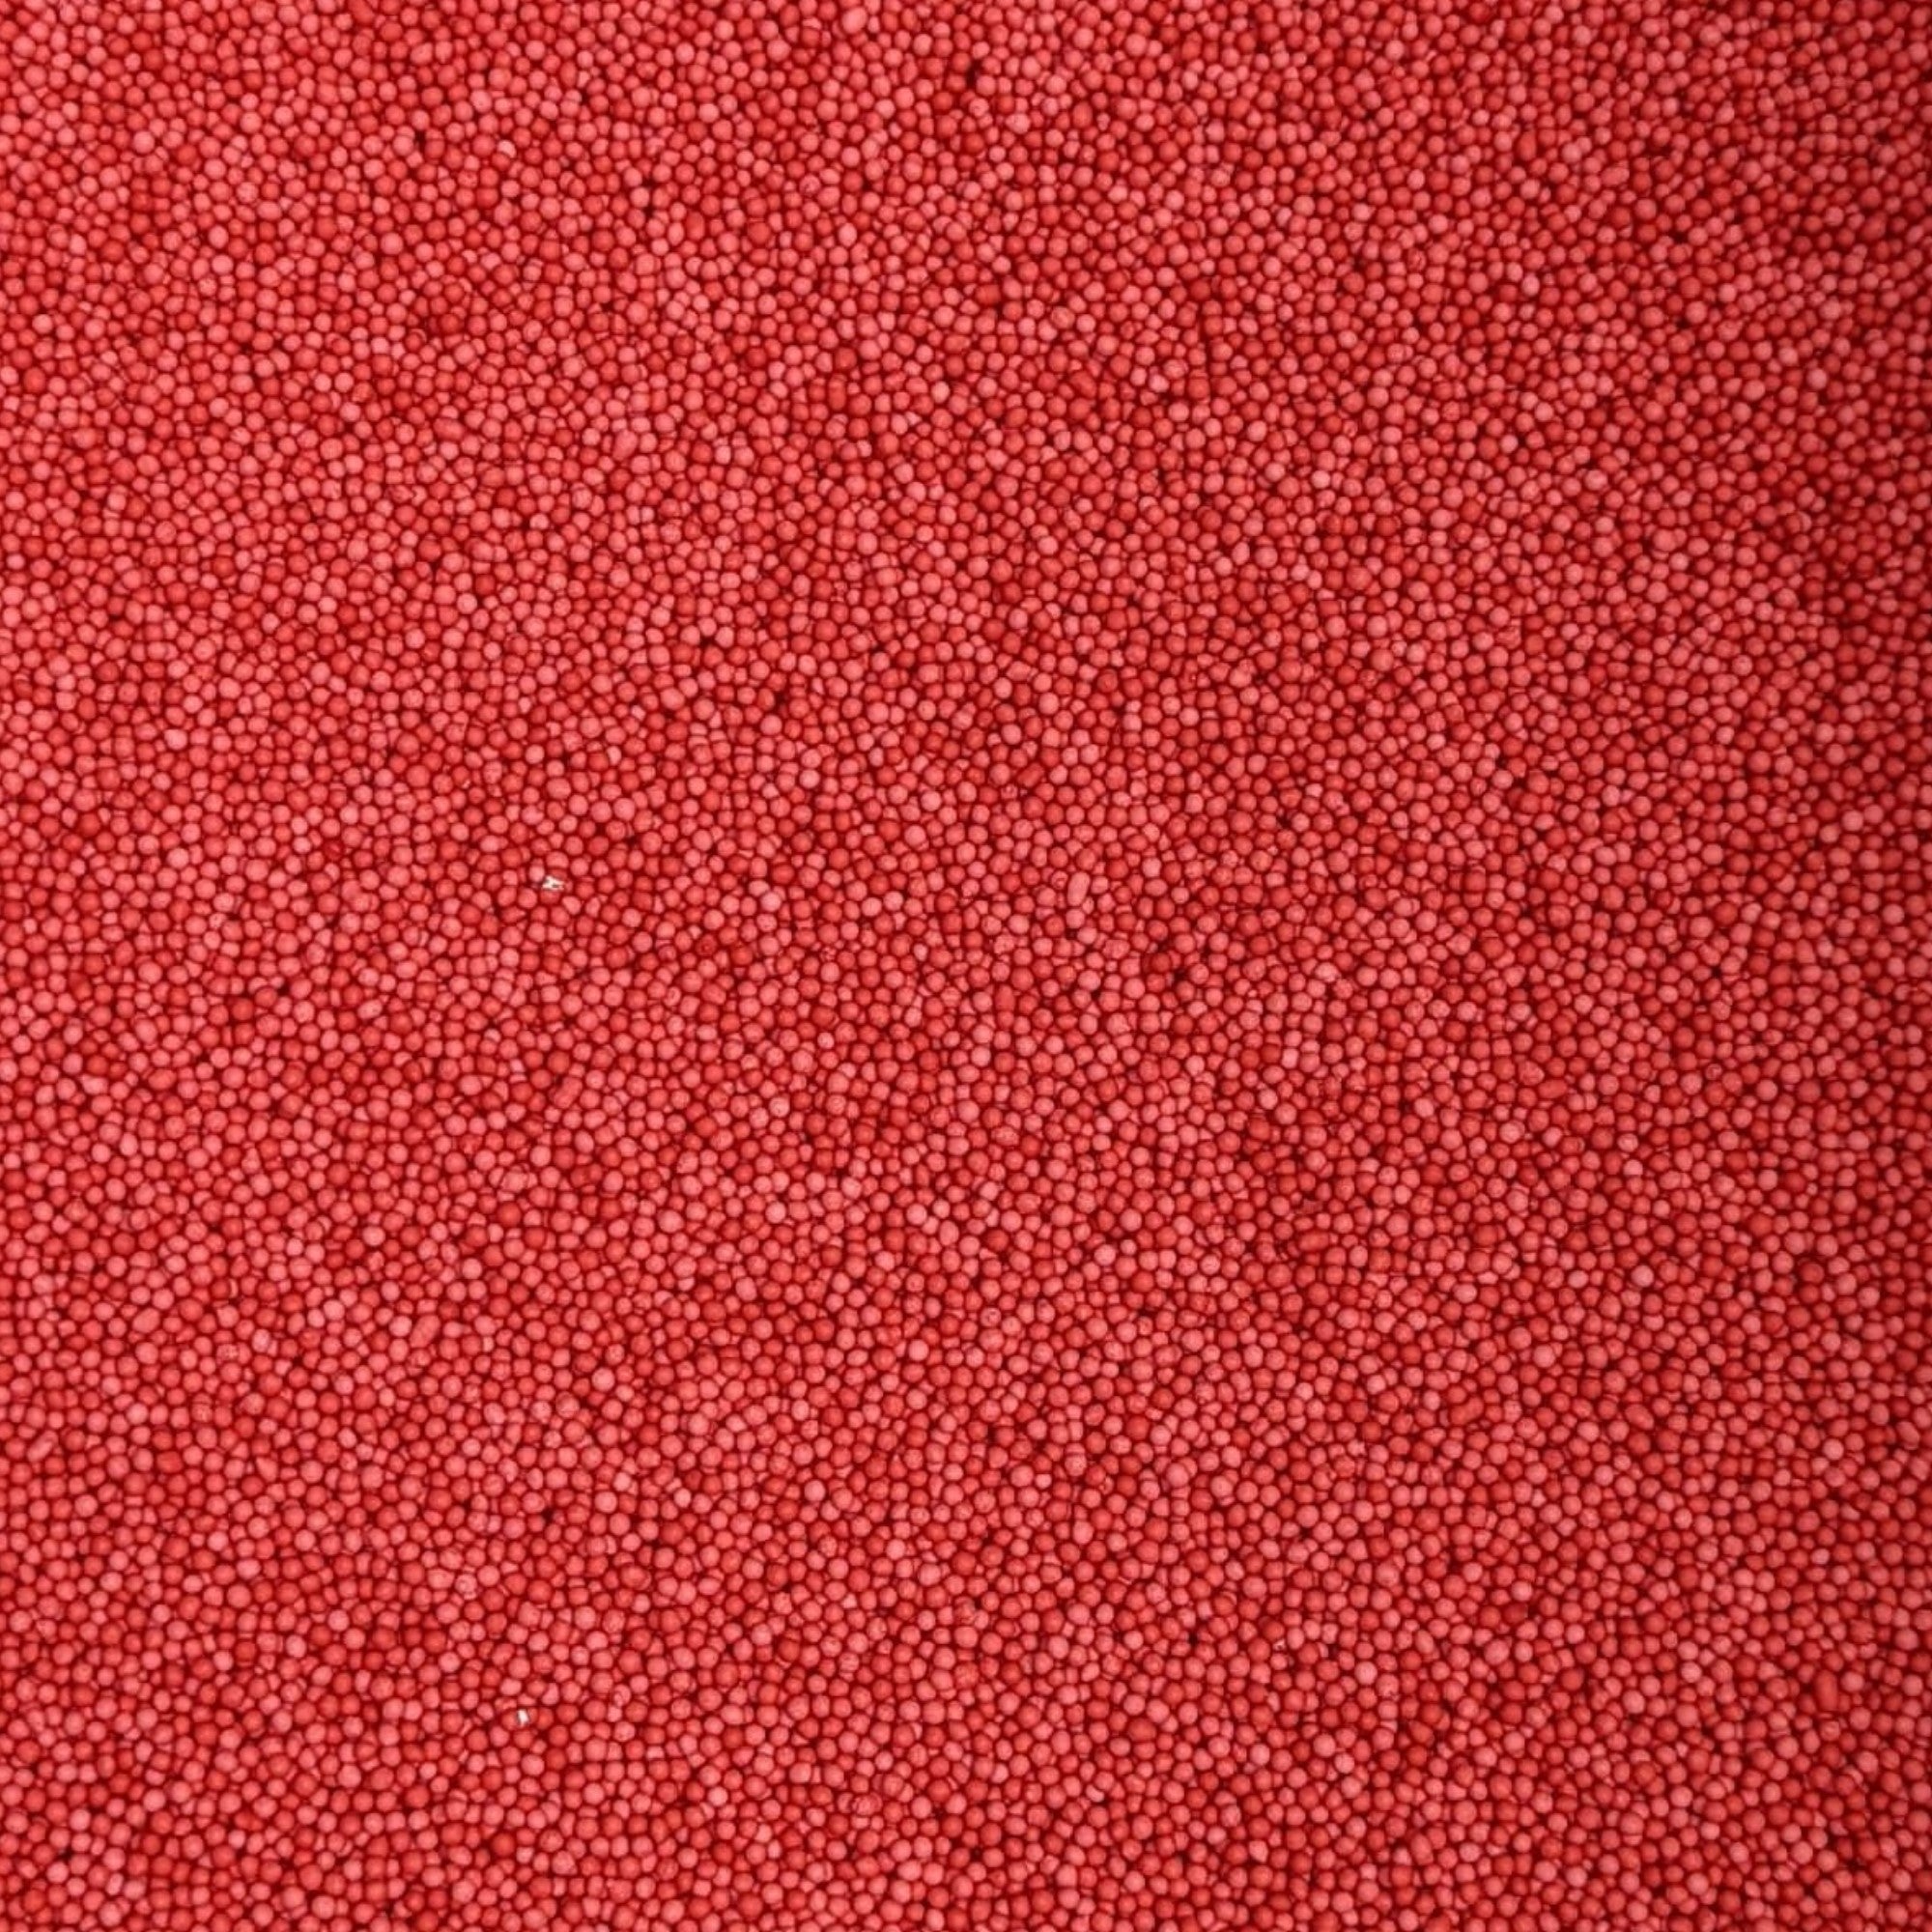 Red Matt 100s & 1000s Cupcake / Cake Decoration Sprinkles Toppers